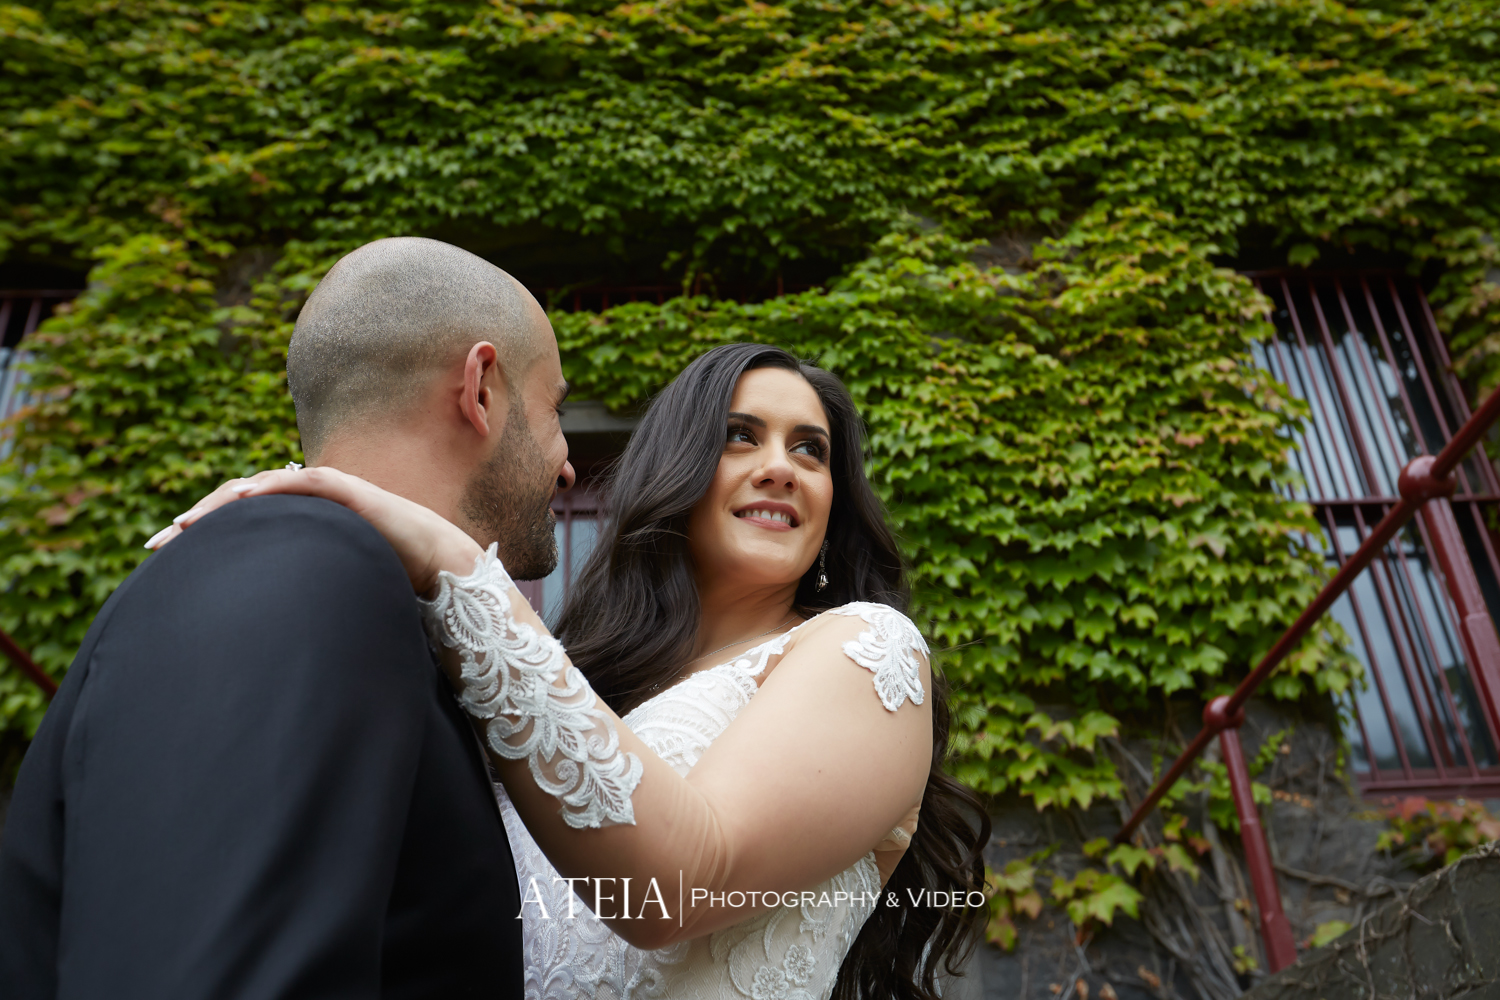 , The Grande Wedding Photography Melbourne by ATEIA Photography &#038; Video